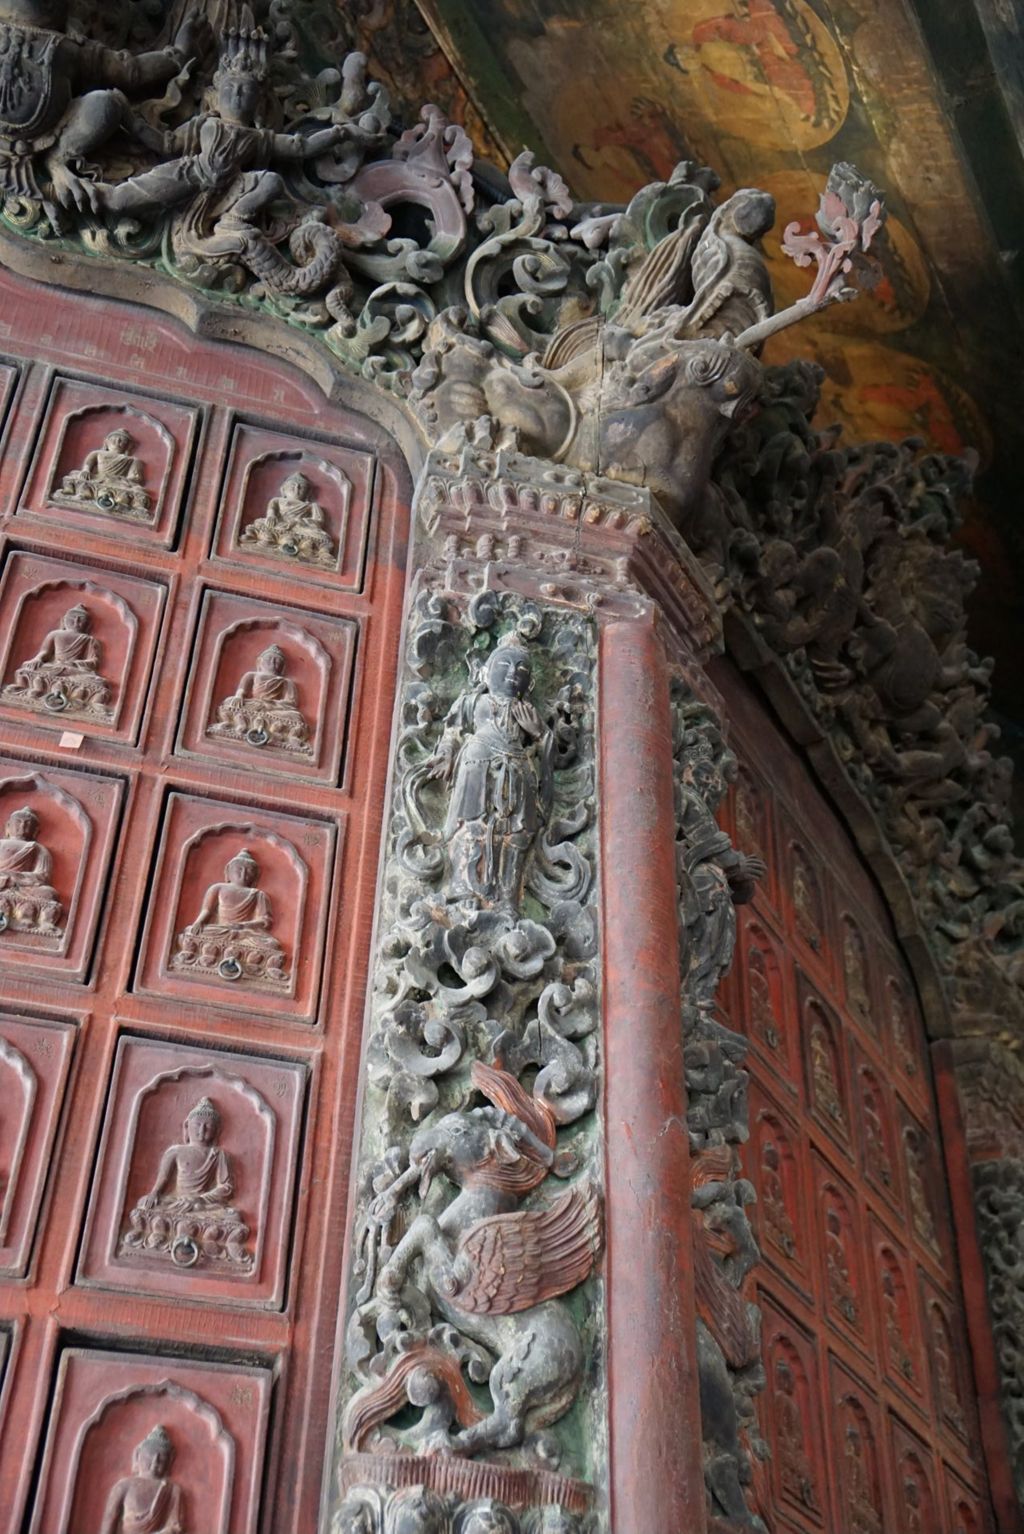 Miniature of Revolving Sutra Cabinet (Zhuanlun Jingzang, or Scripture Cabinet) in Sutra Hall (Zangdian, or Scripture Hall), Leviathan at the corner